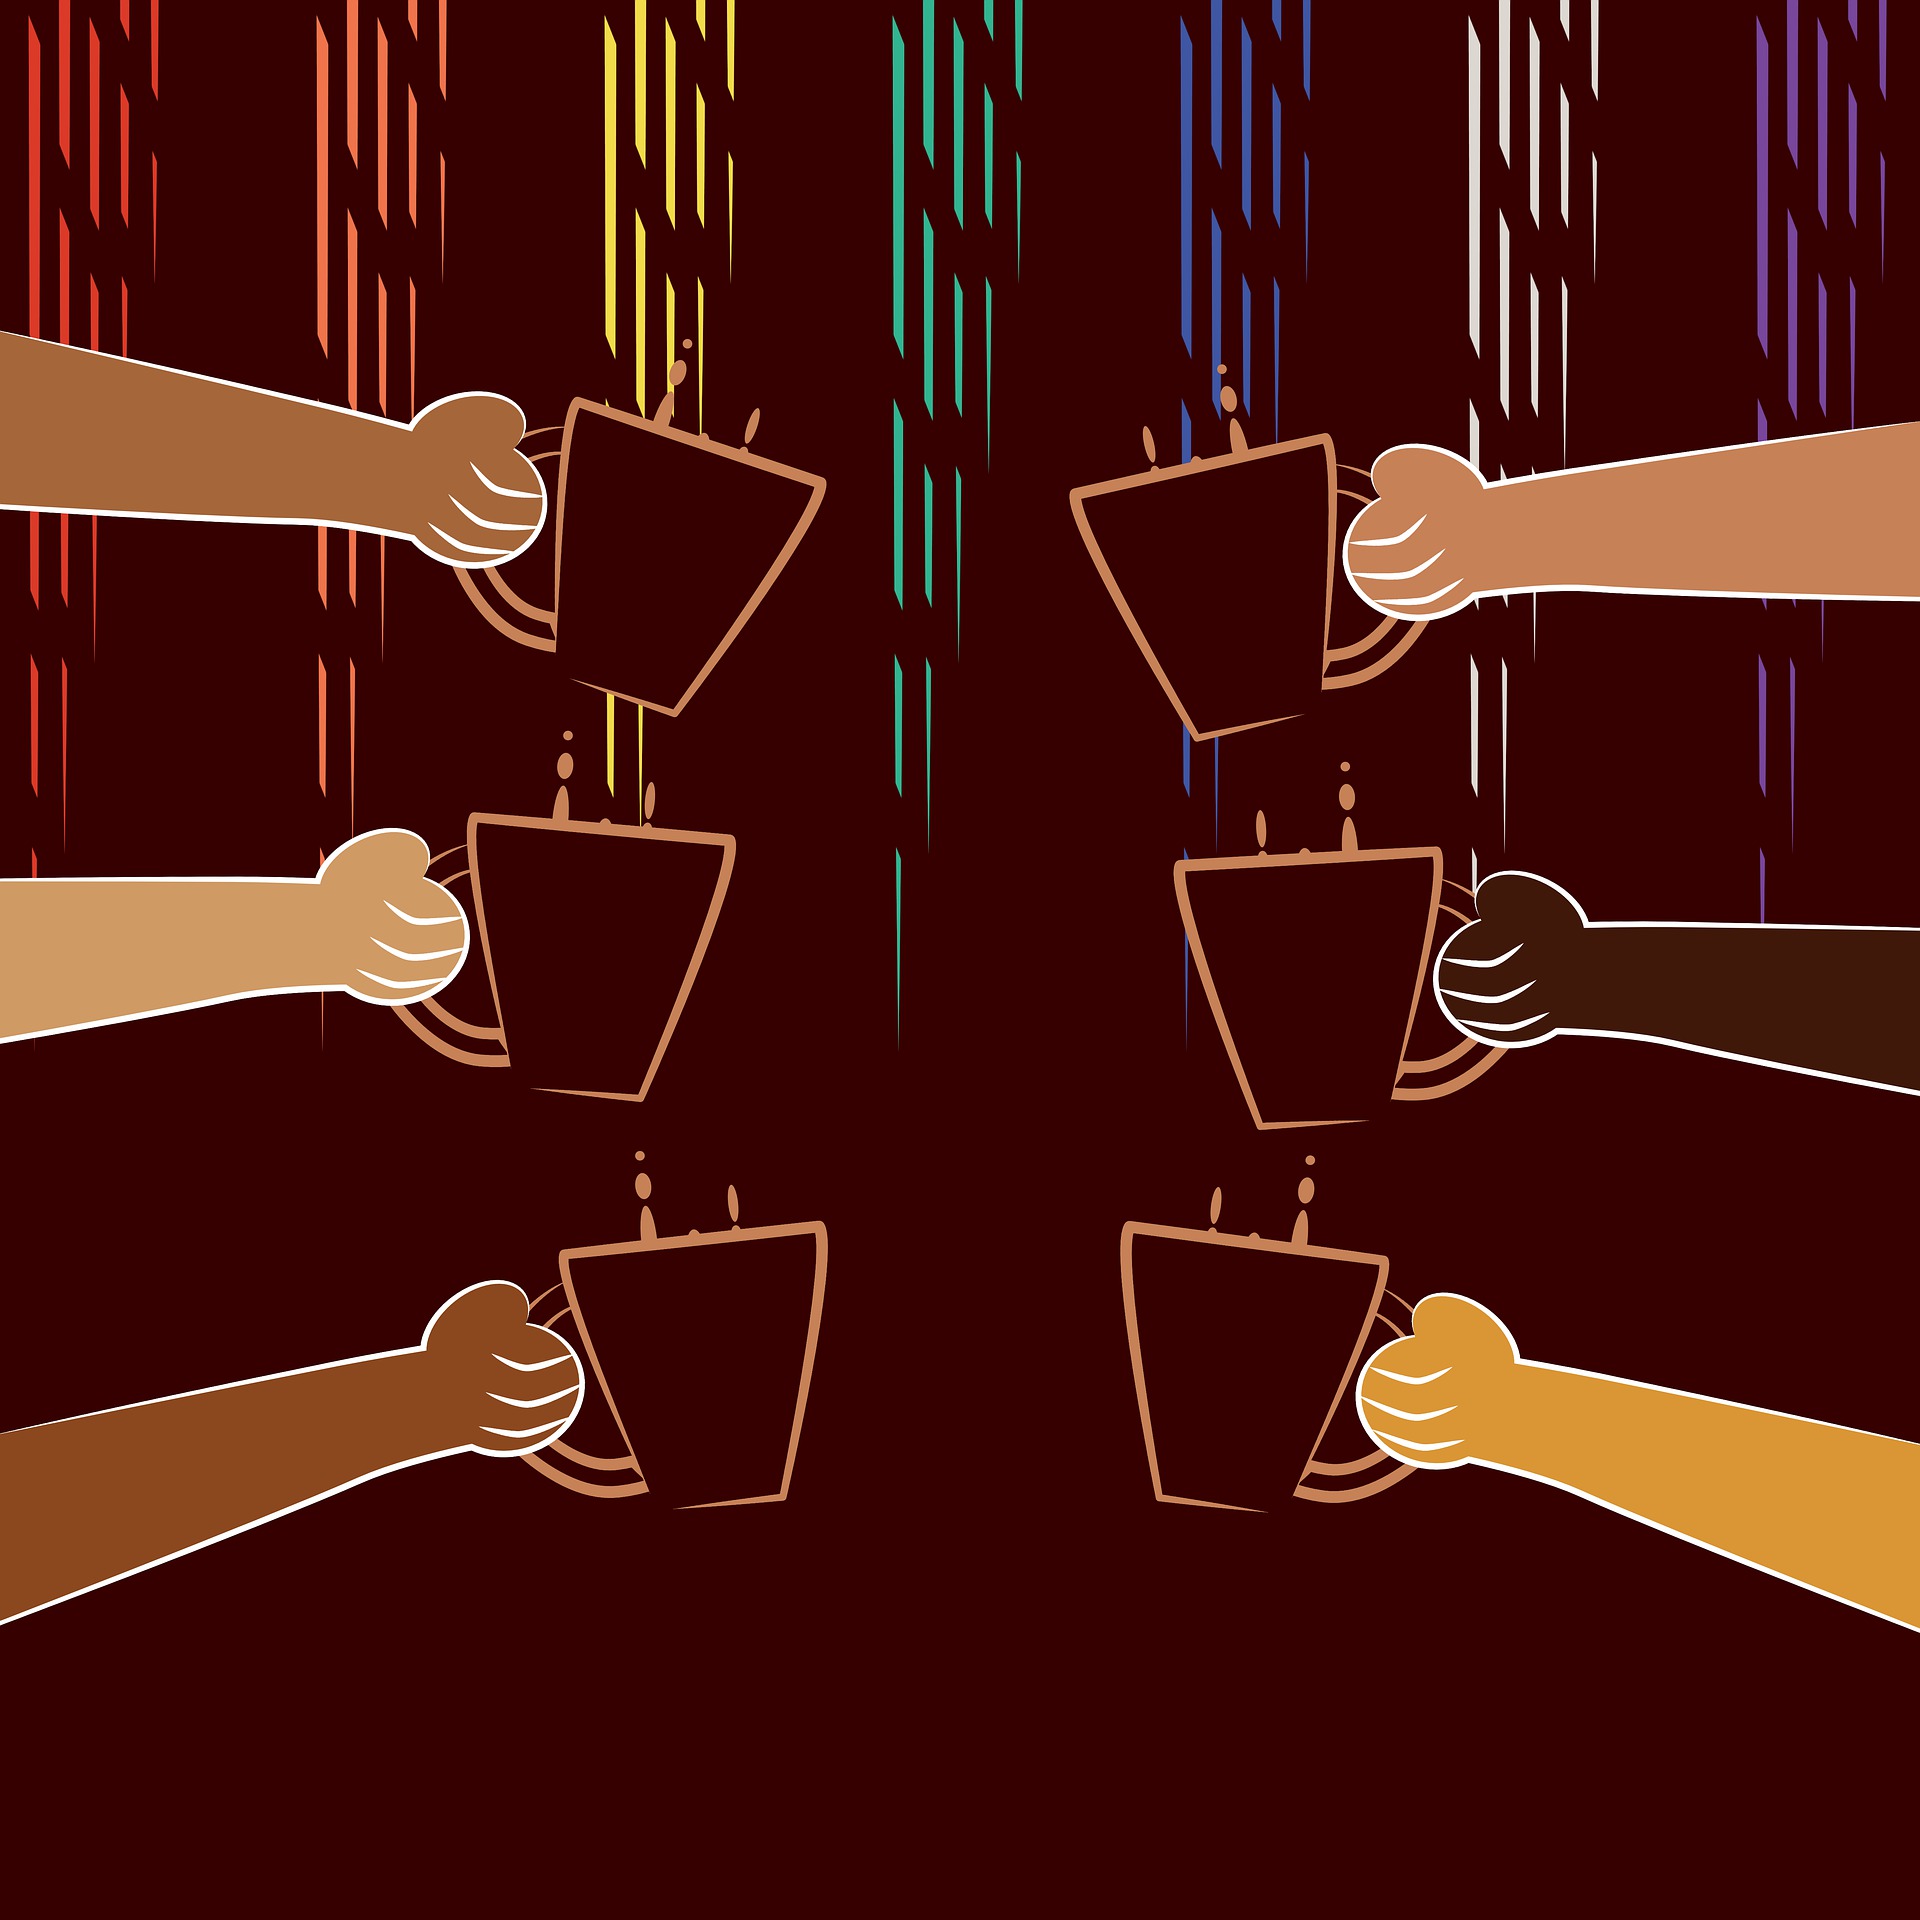 square image with a dark brown background showing cartoon arms with different skin tones holding coffee mugs toward the center of the image (three on the left, three on the right). The upper part of the image also has line designs in rainbow colors.